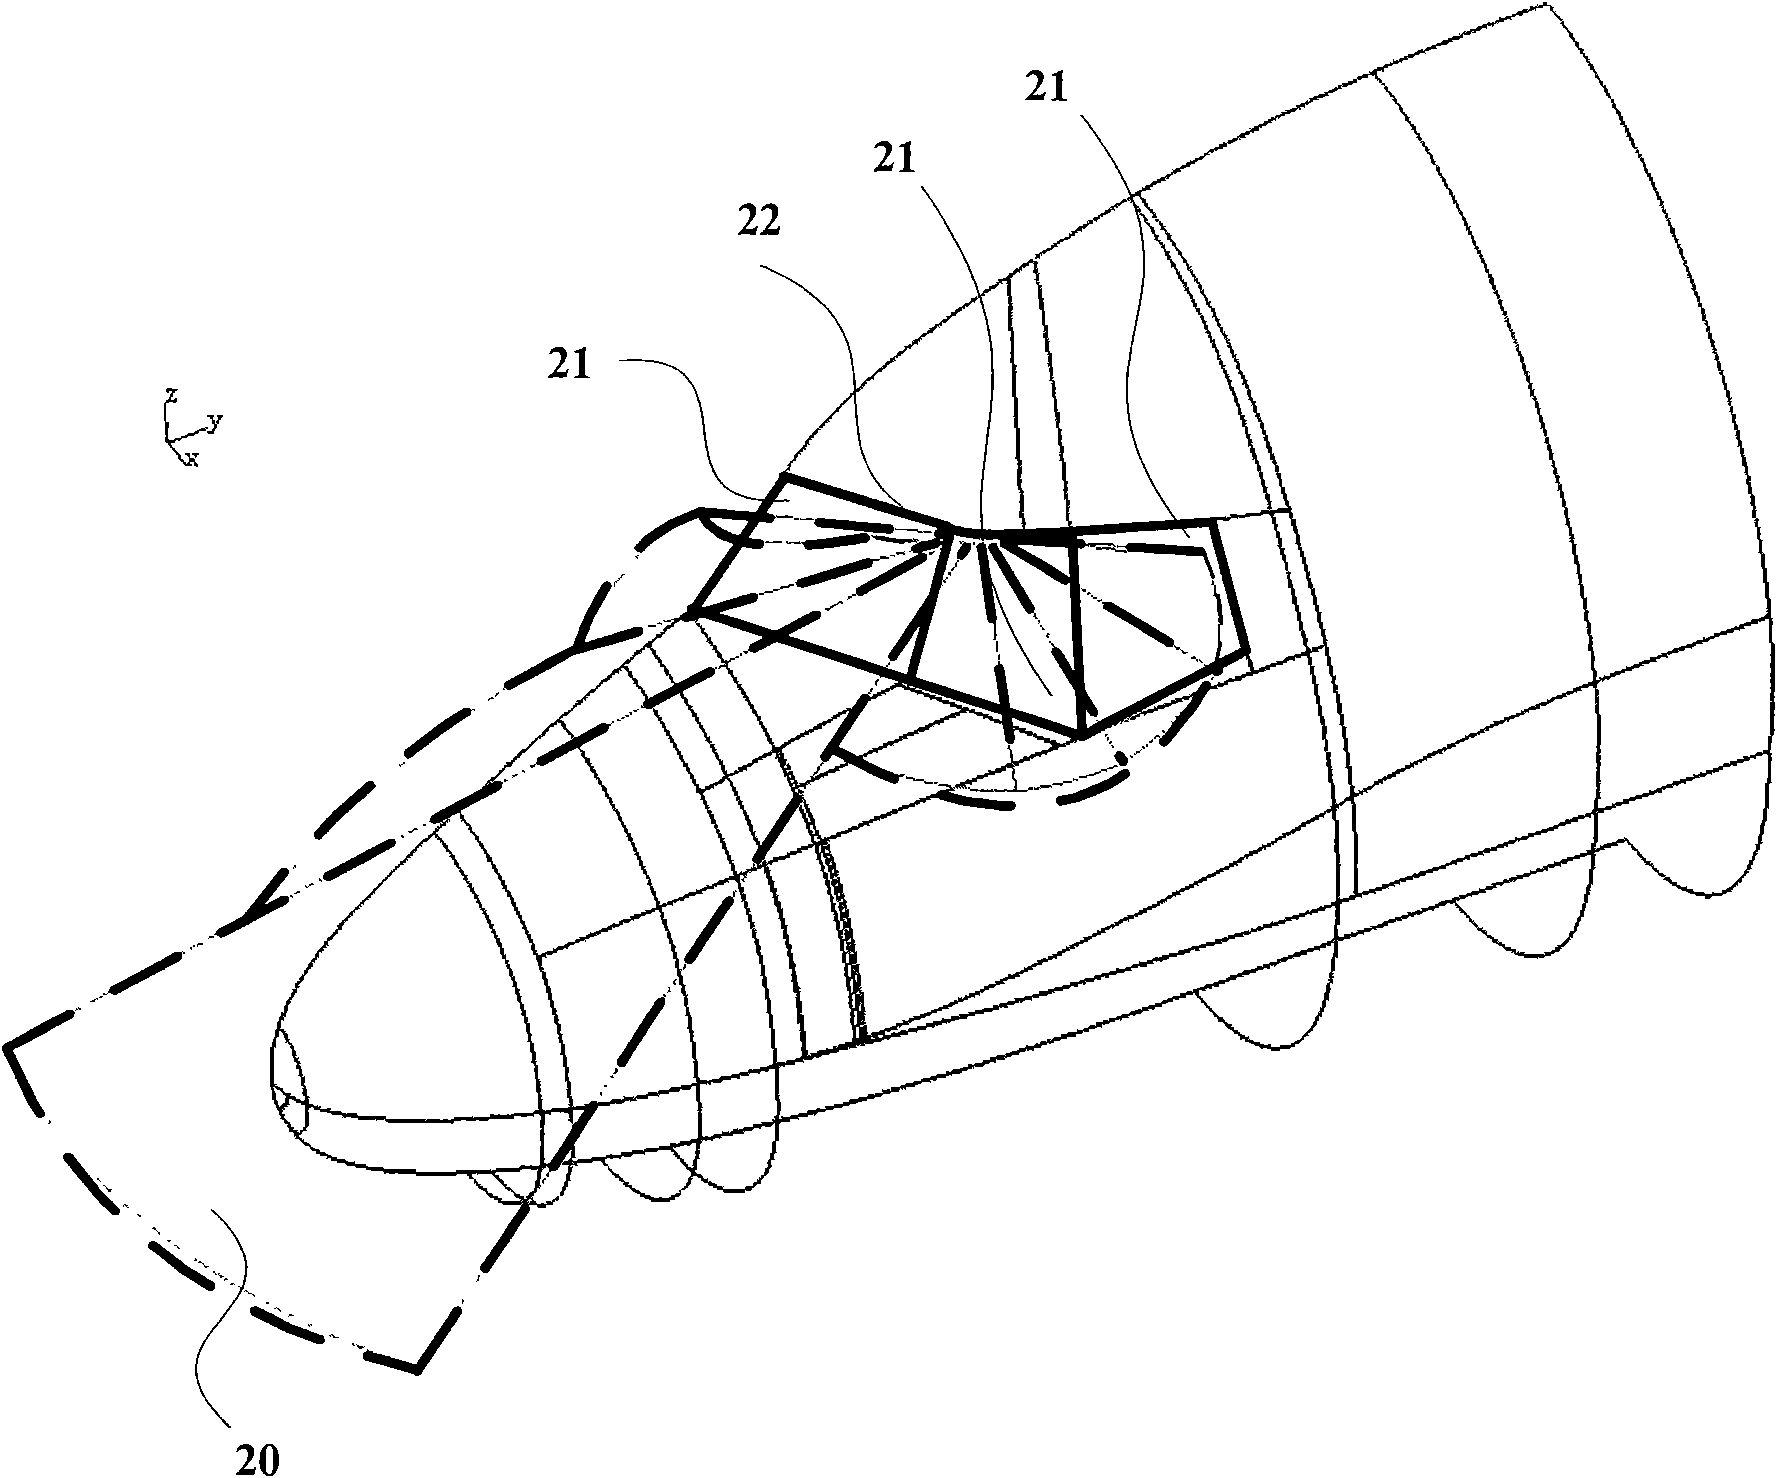 Method for designing plane control cabin windshield specific to visual field